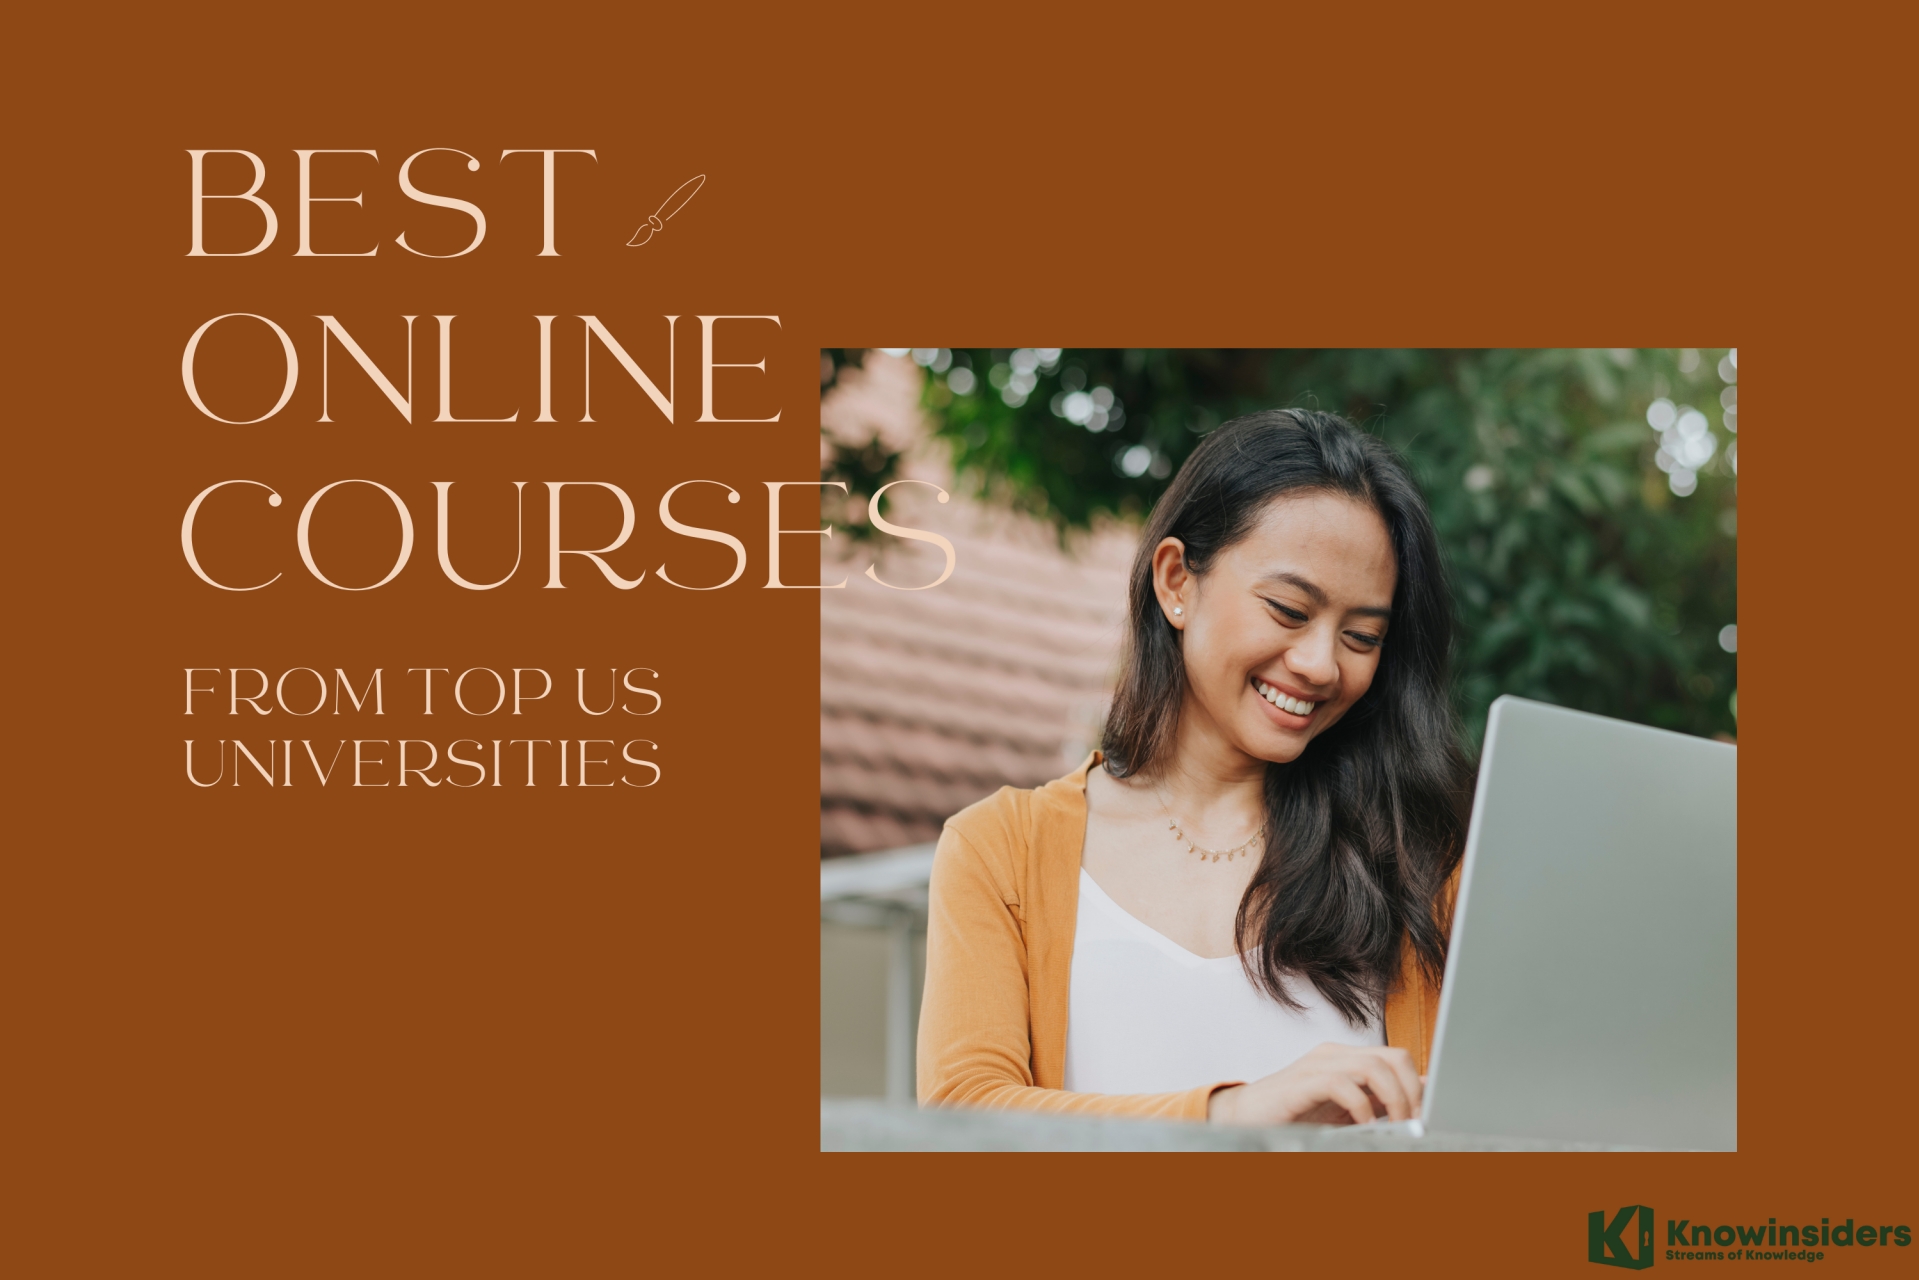 15 Most Popular Online Courses from US Universities